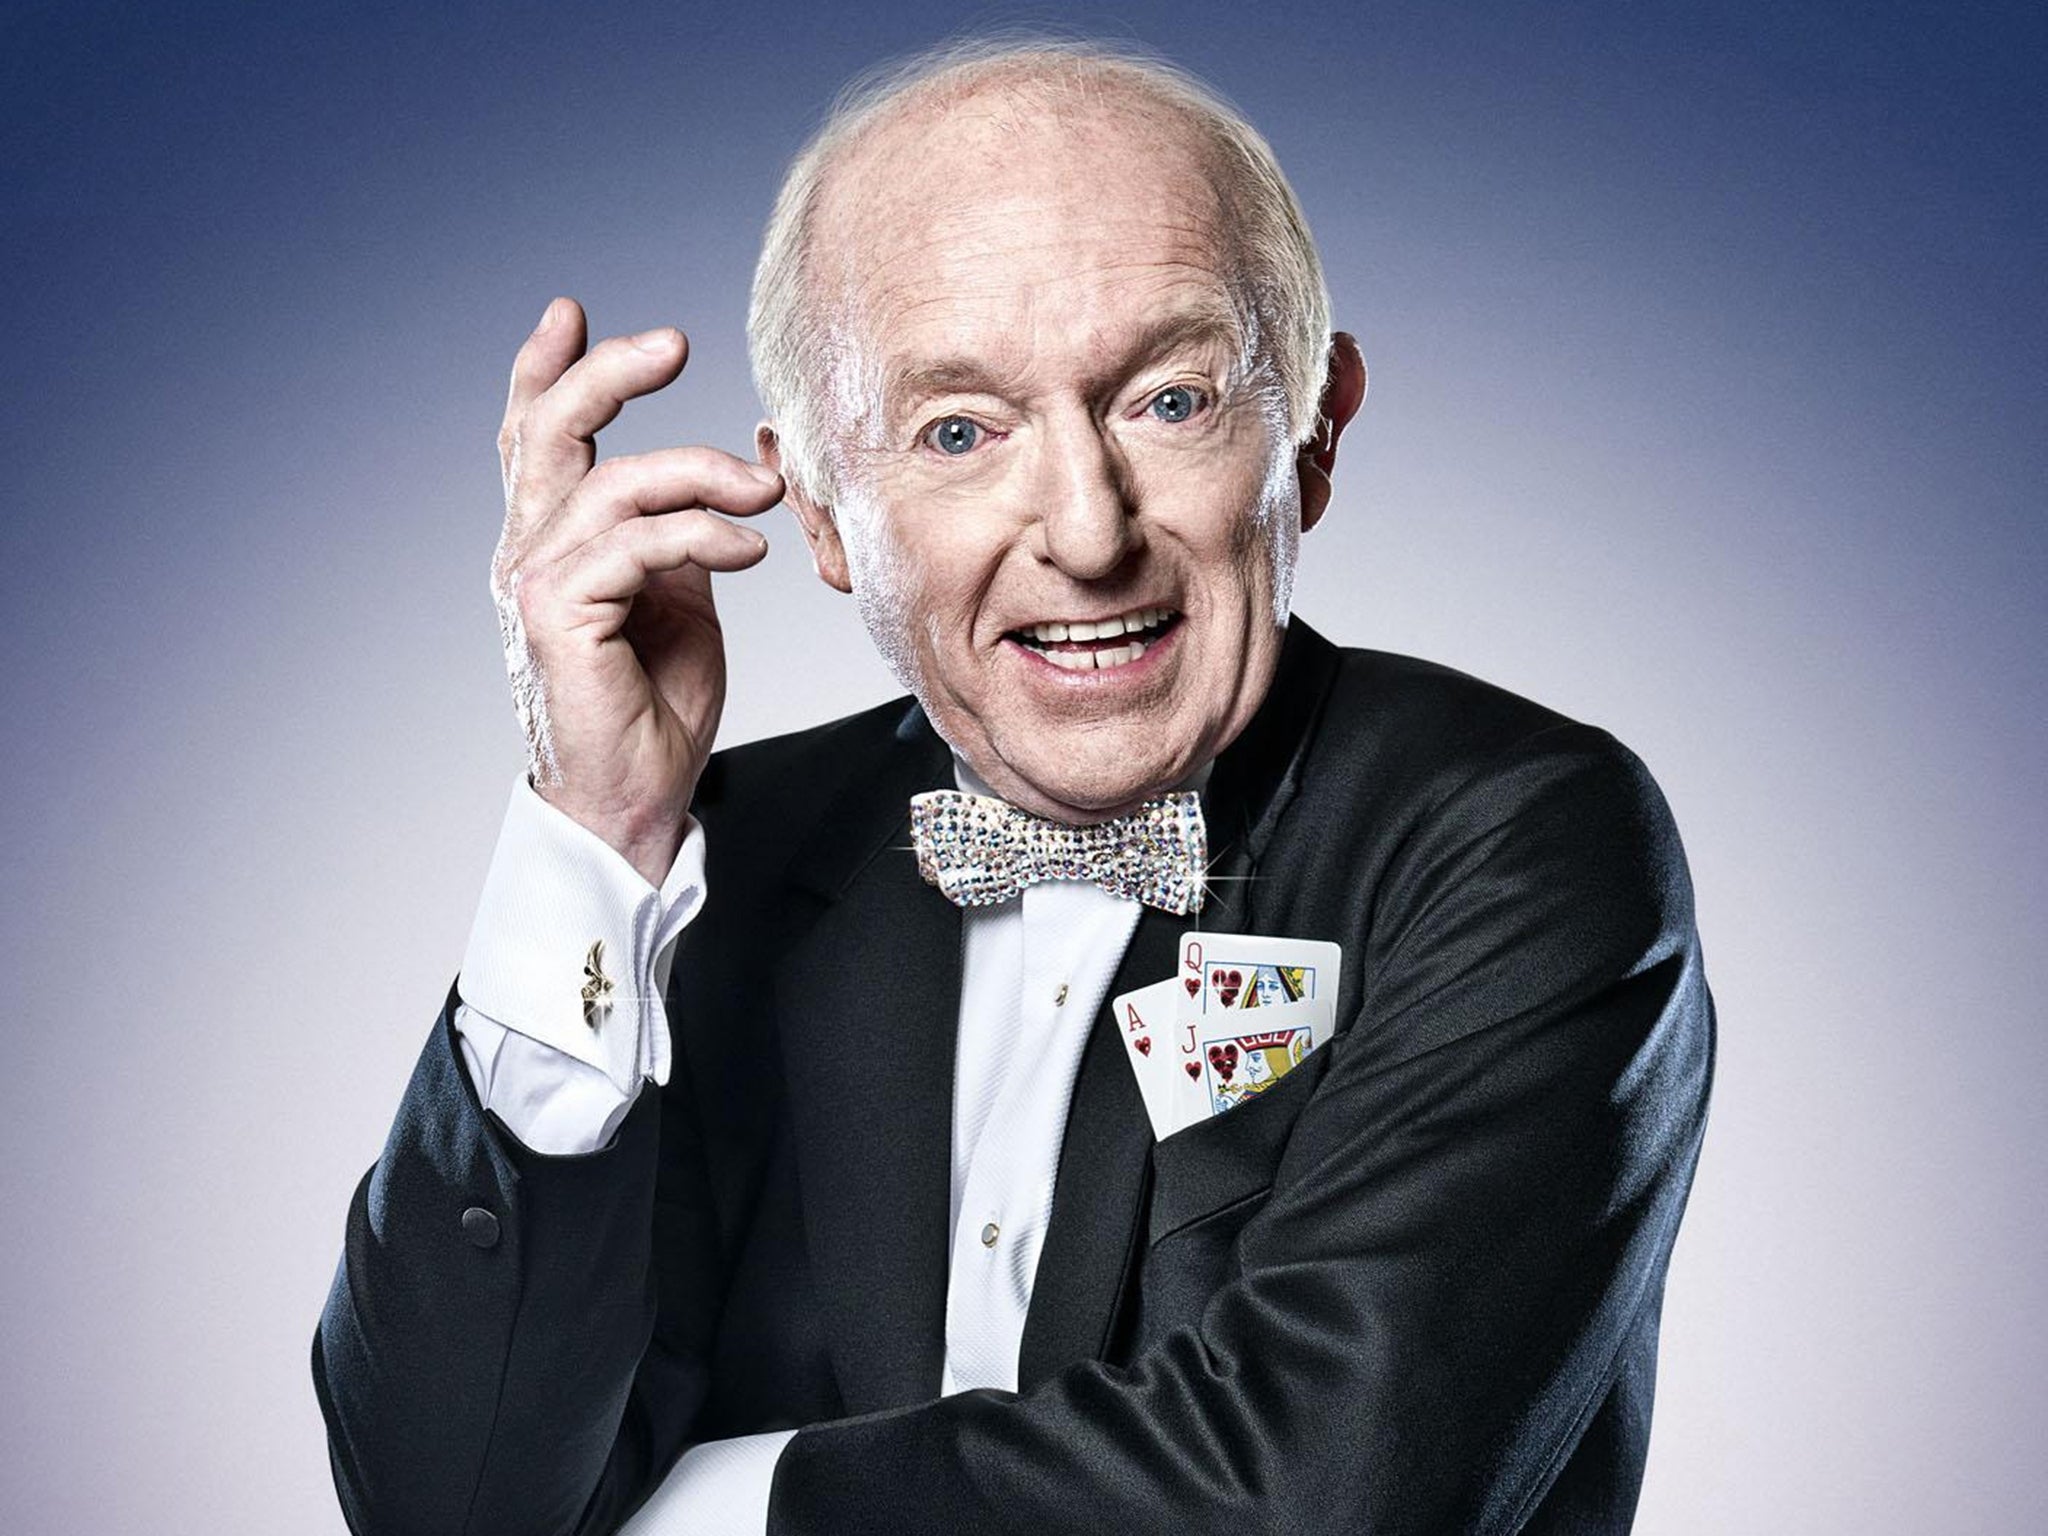 Climbing the ranks of British show business the lively entertainer became the most famous magician of the past half-century.